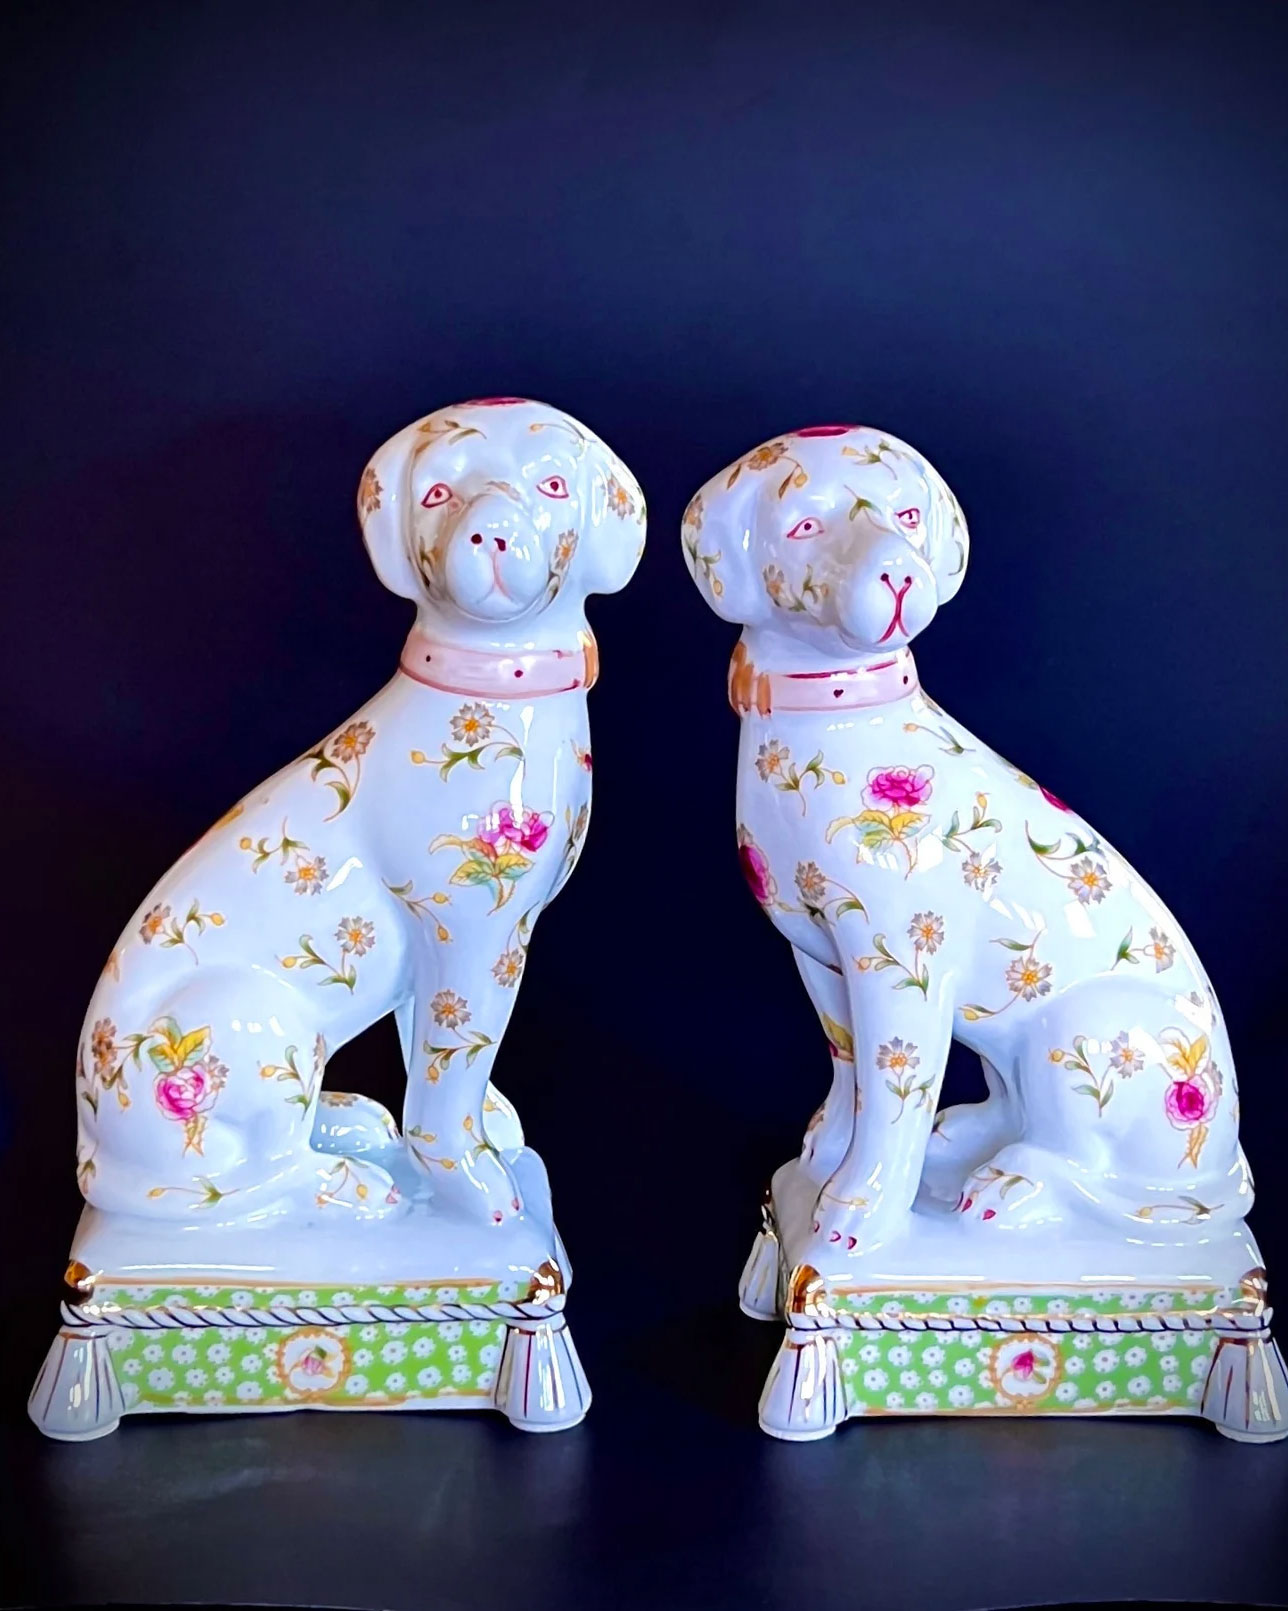 Staffordshire dog figurines from Etsy